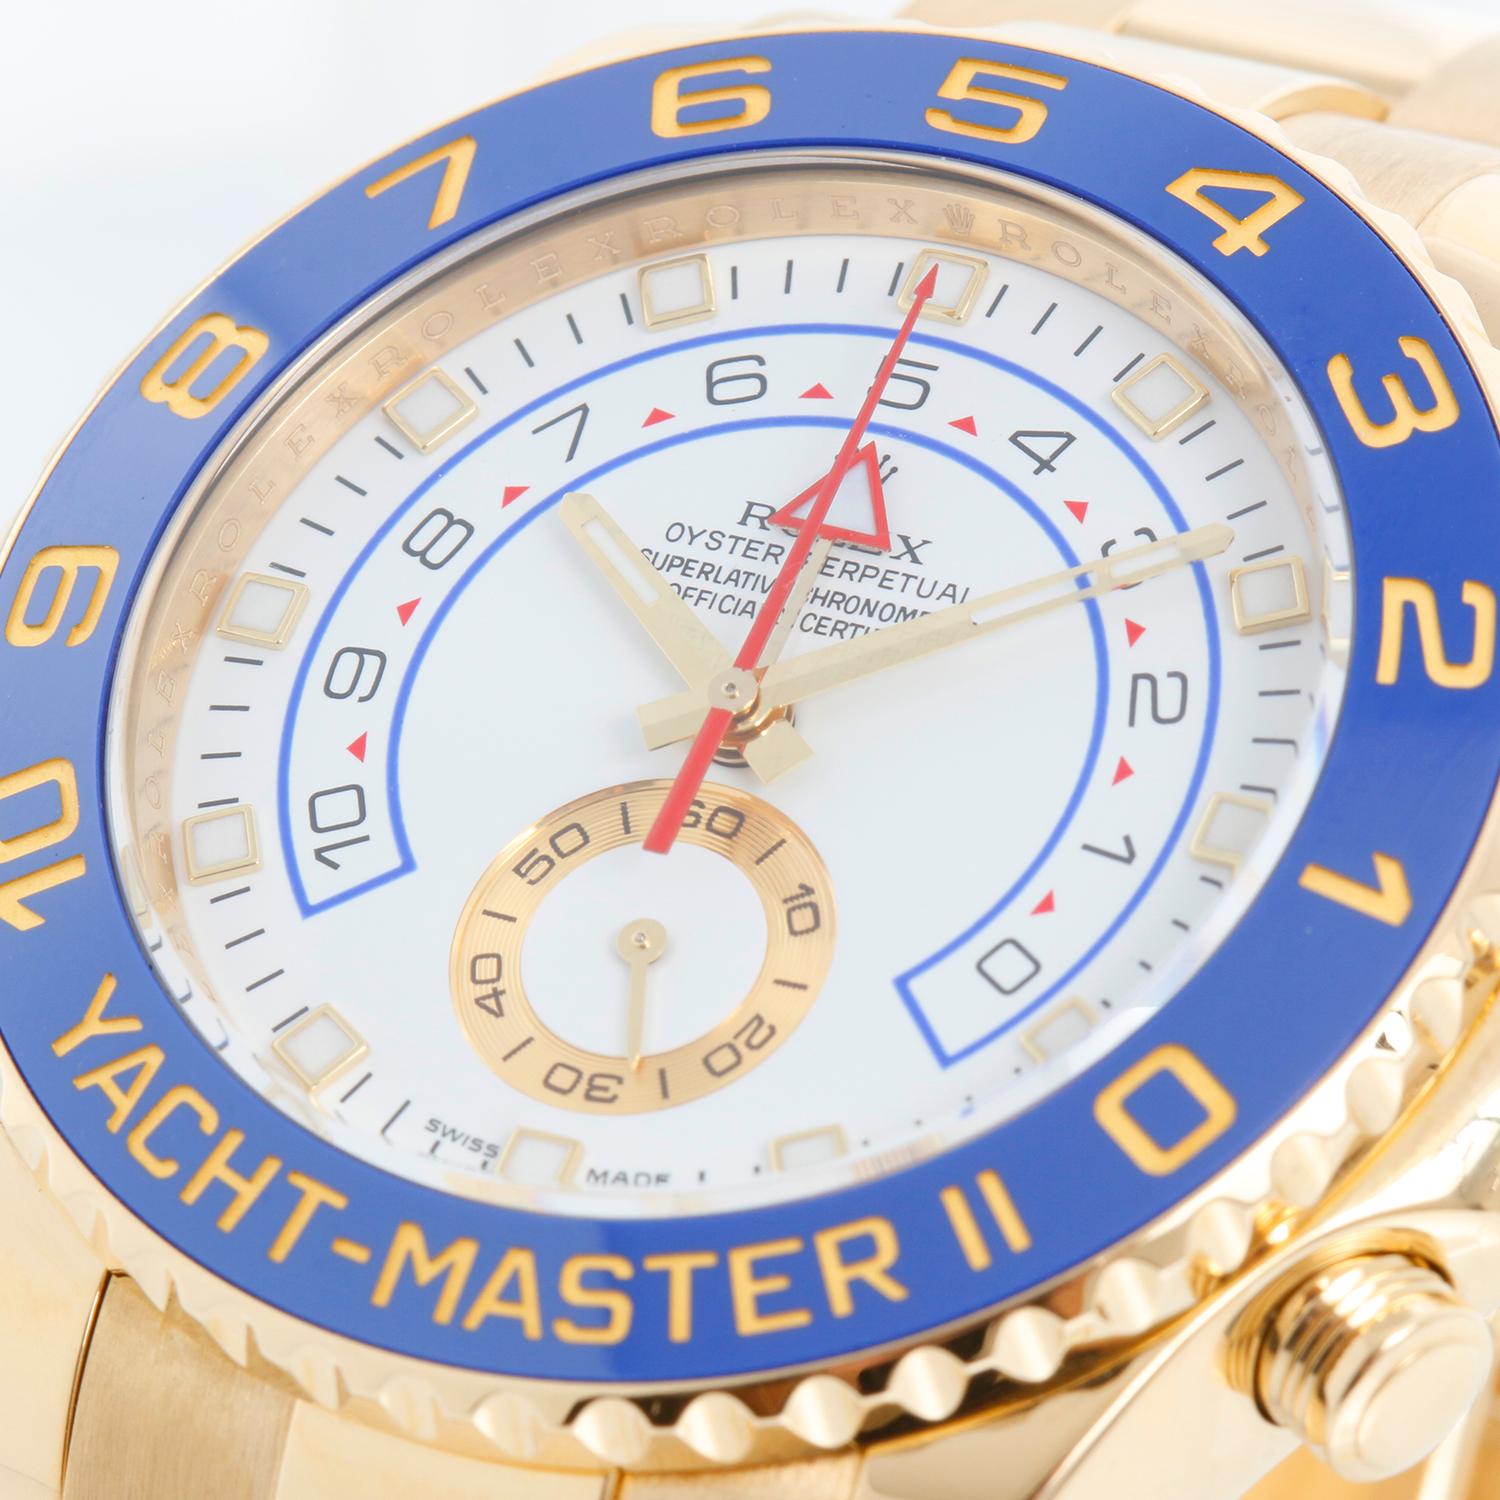 Men's Rolex Yacht-Master II Regatta 18k Yellow Gold Watch 116688 - Automatic winding, Regatta Chronograph, 31 jewels, sapphire crystal. 18k yellow gold case with rotatable Ring Command bezel with blue insert (44mm diameter). White dial with luminous